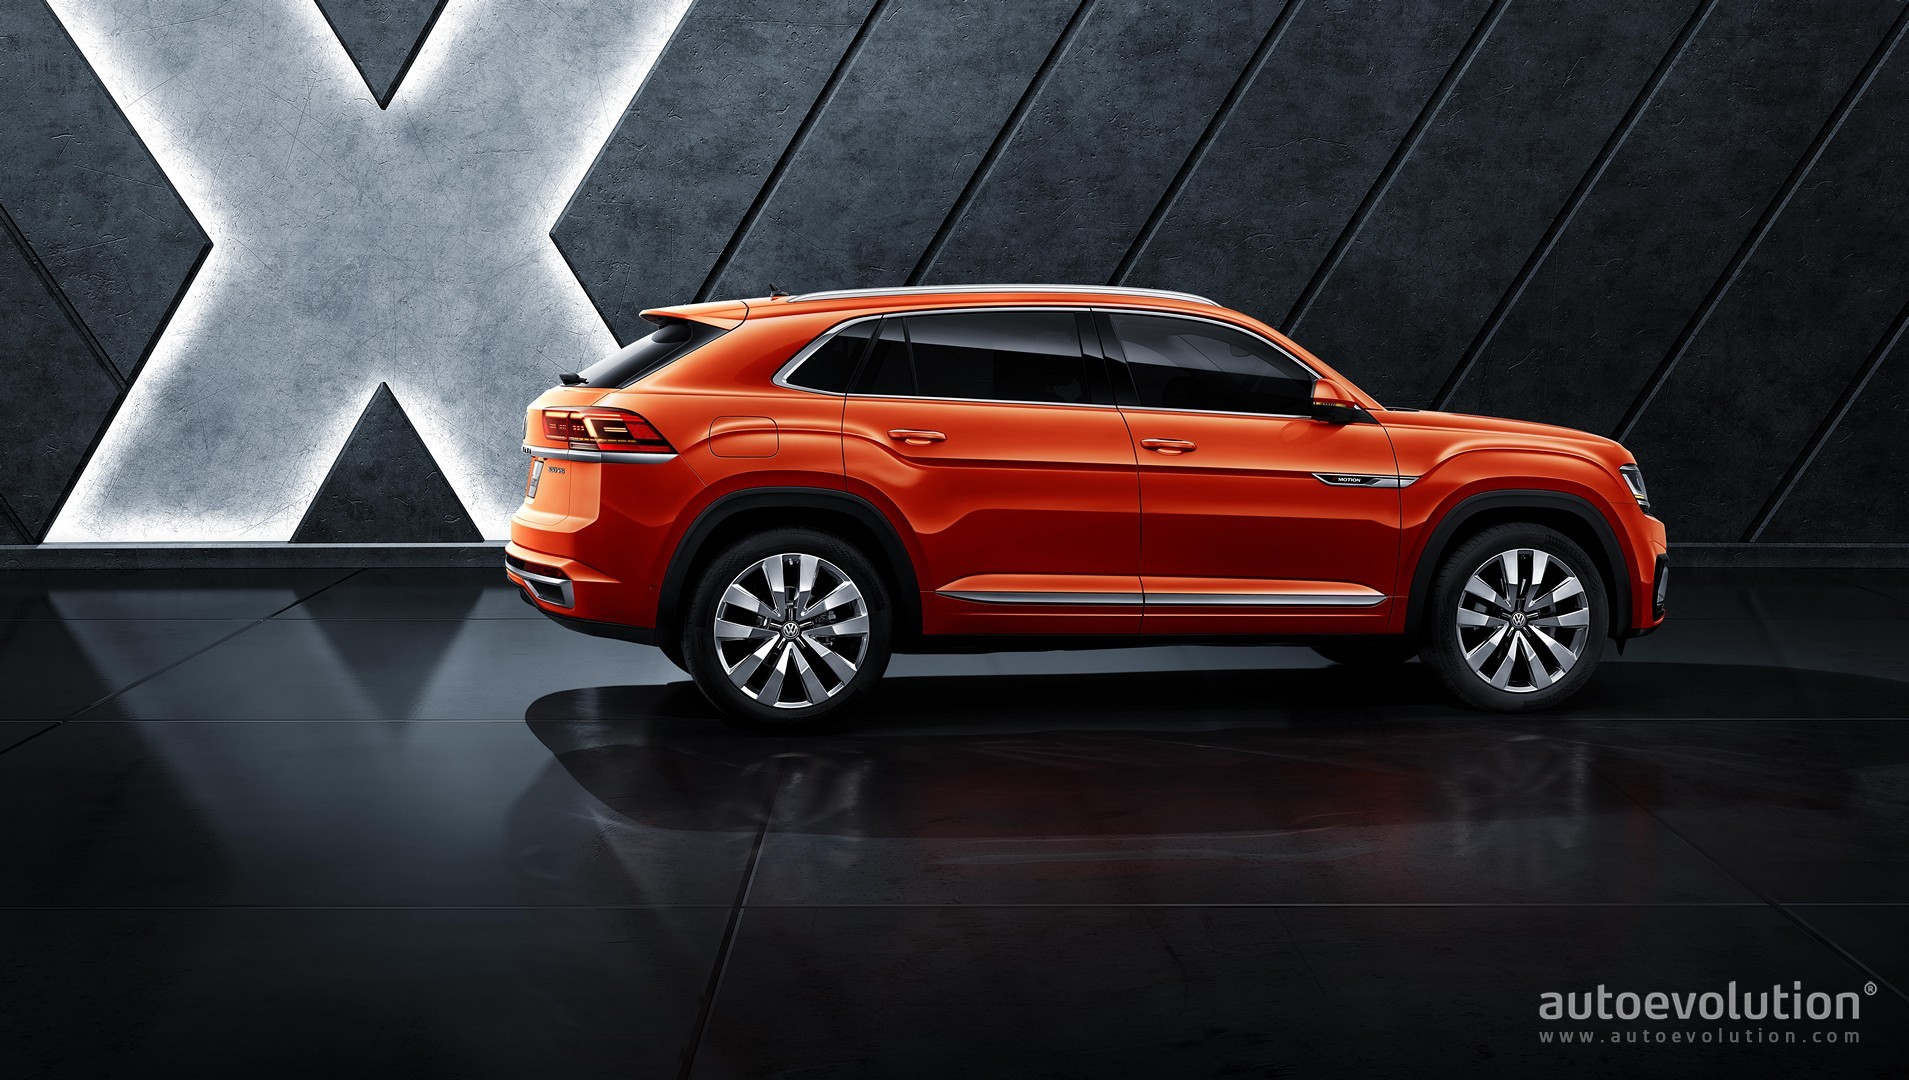 Volkswagen Teramont X (Atlas Coupe) and Possible Tiguan Coupe Unveiled - autoevolution